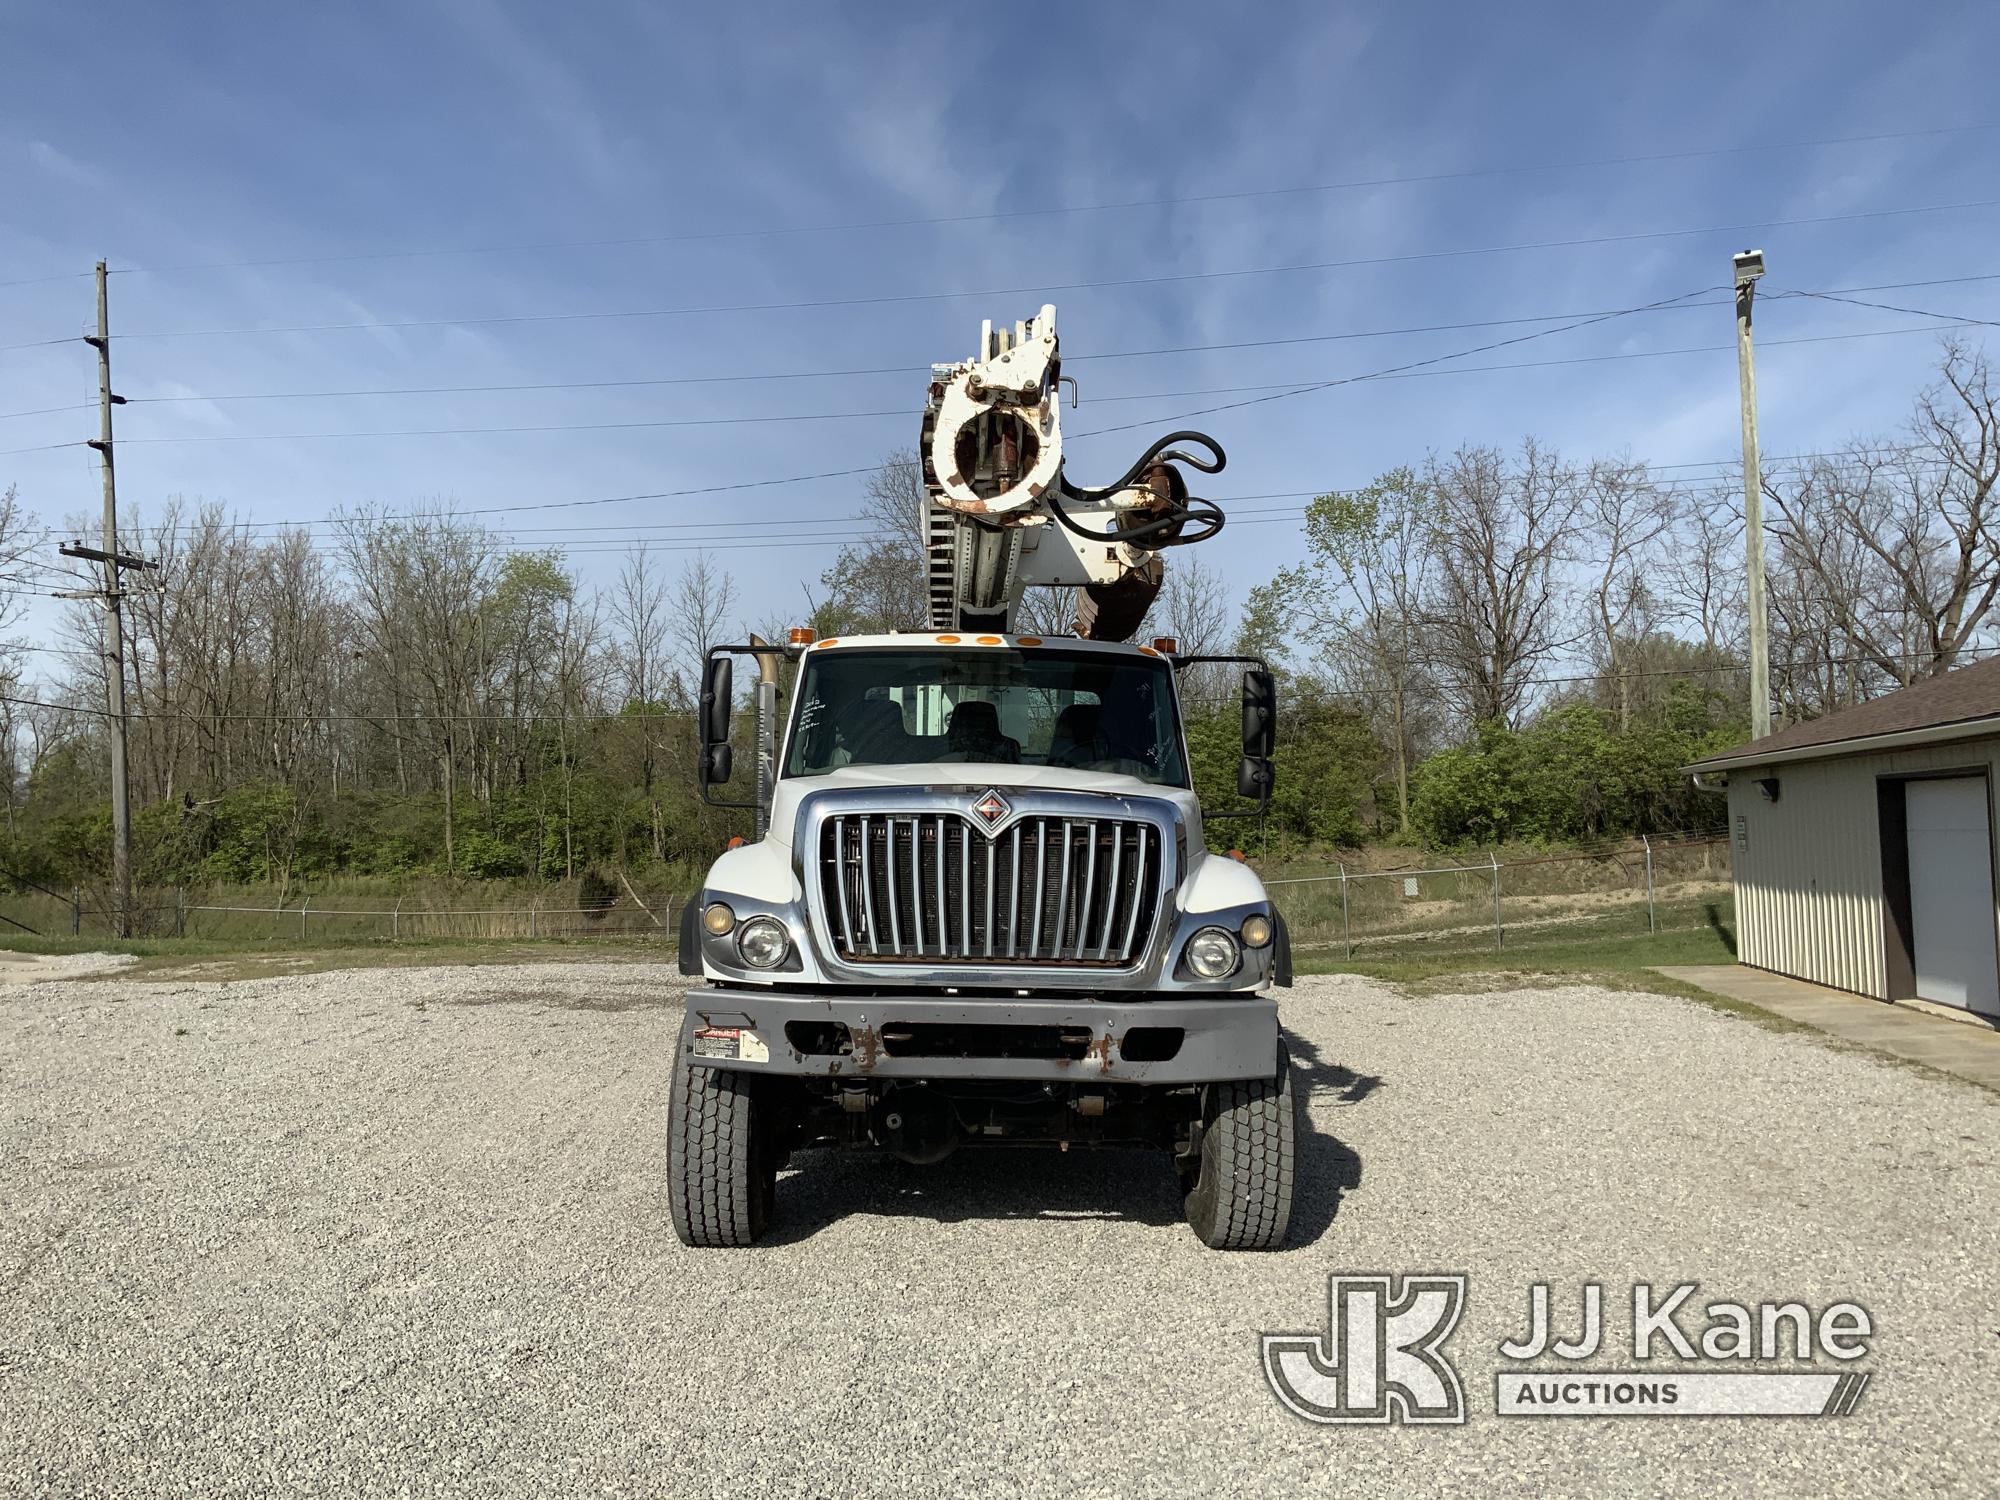 (Fort Wayne, IN) Altec D4065A-TR, Digger Derrick rear mounted on 2012 International 7400 T/A Utility